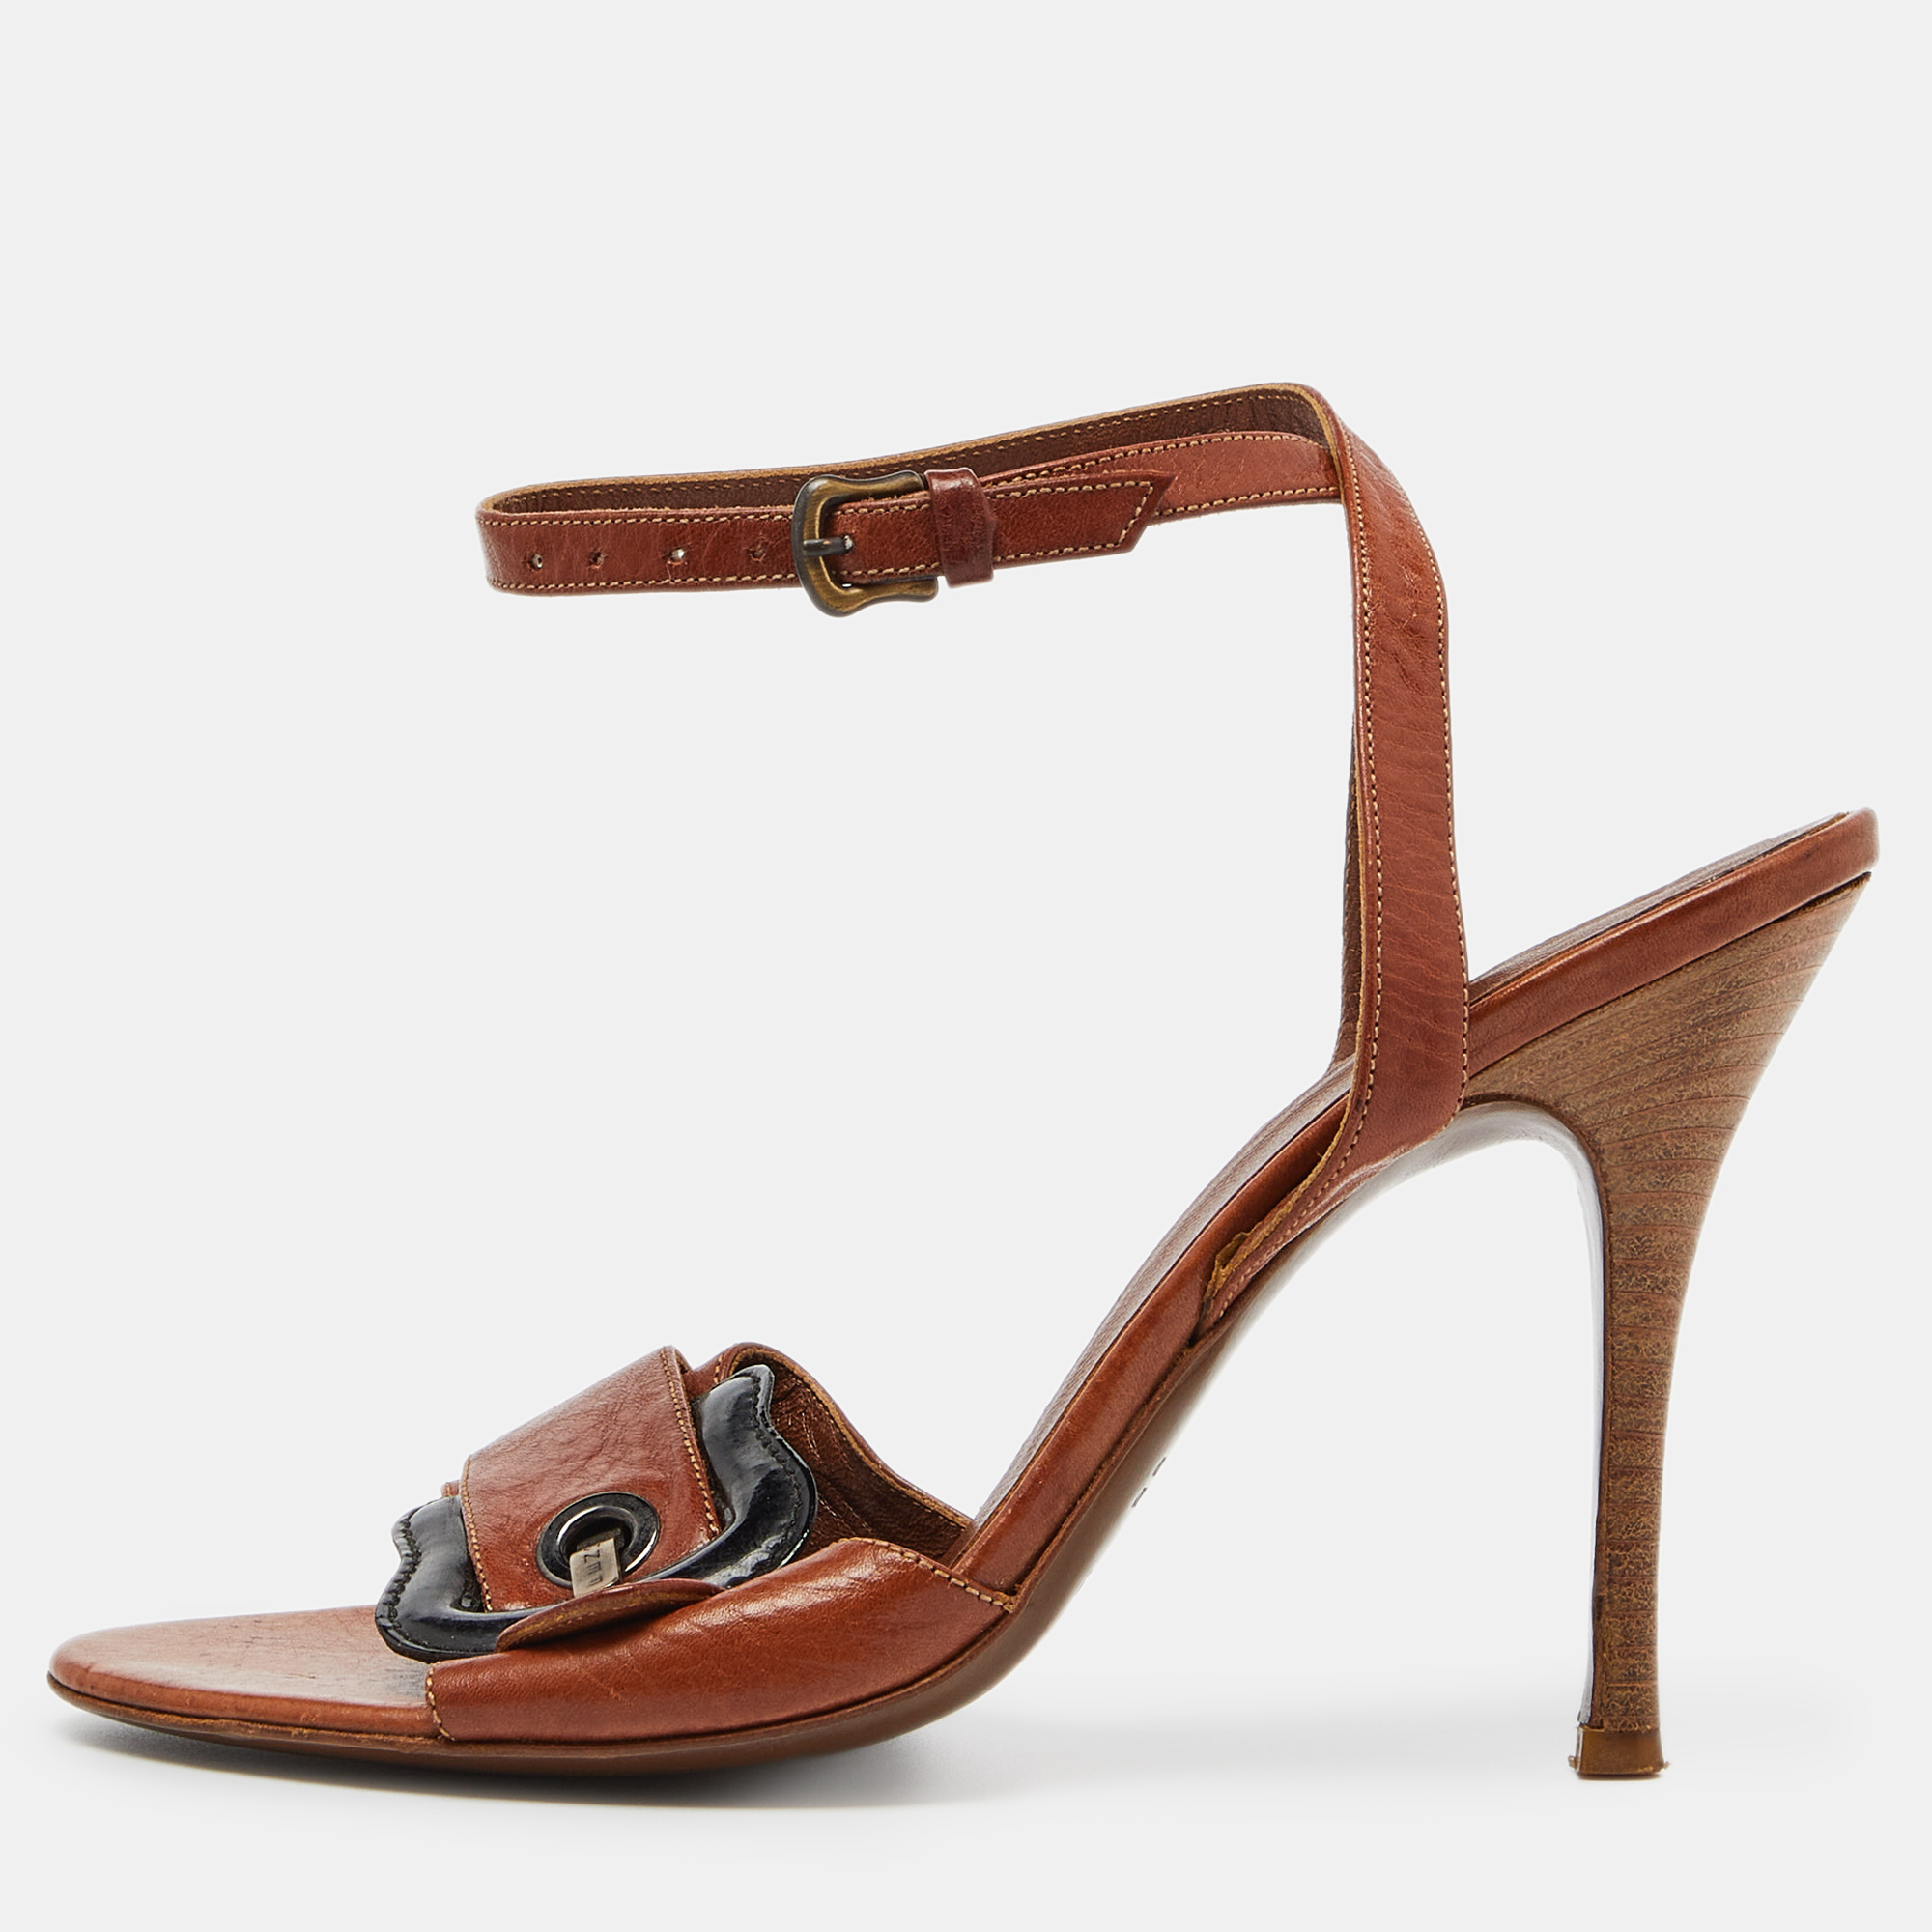 Fendi brown leather buckle detail ankle strap sandals size 37